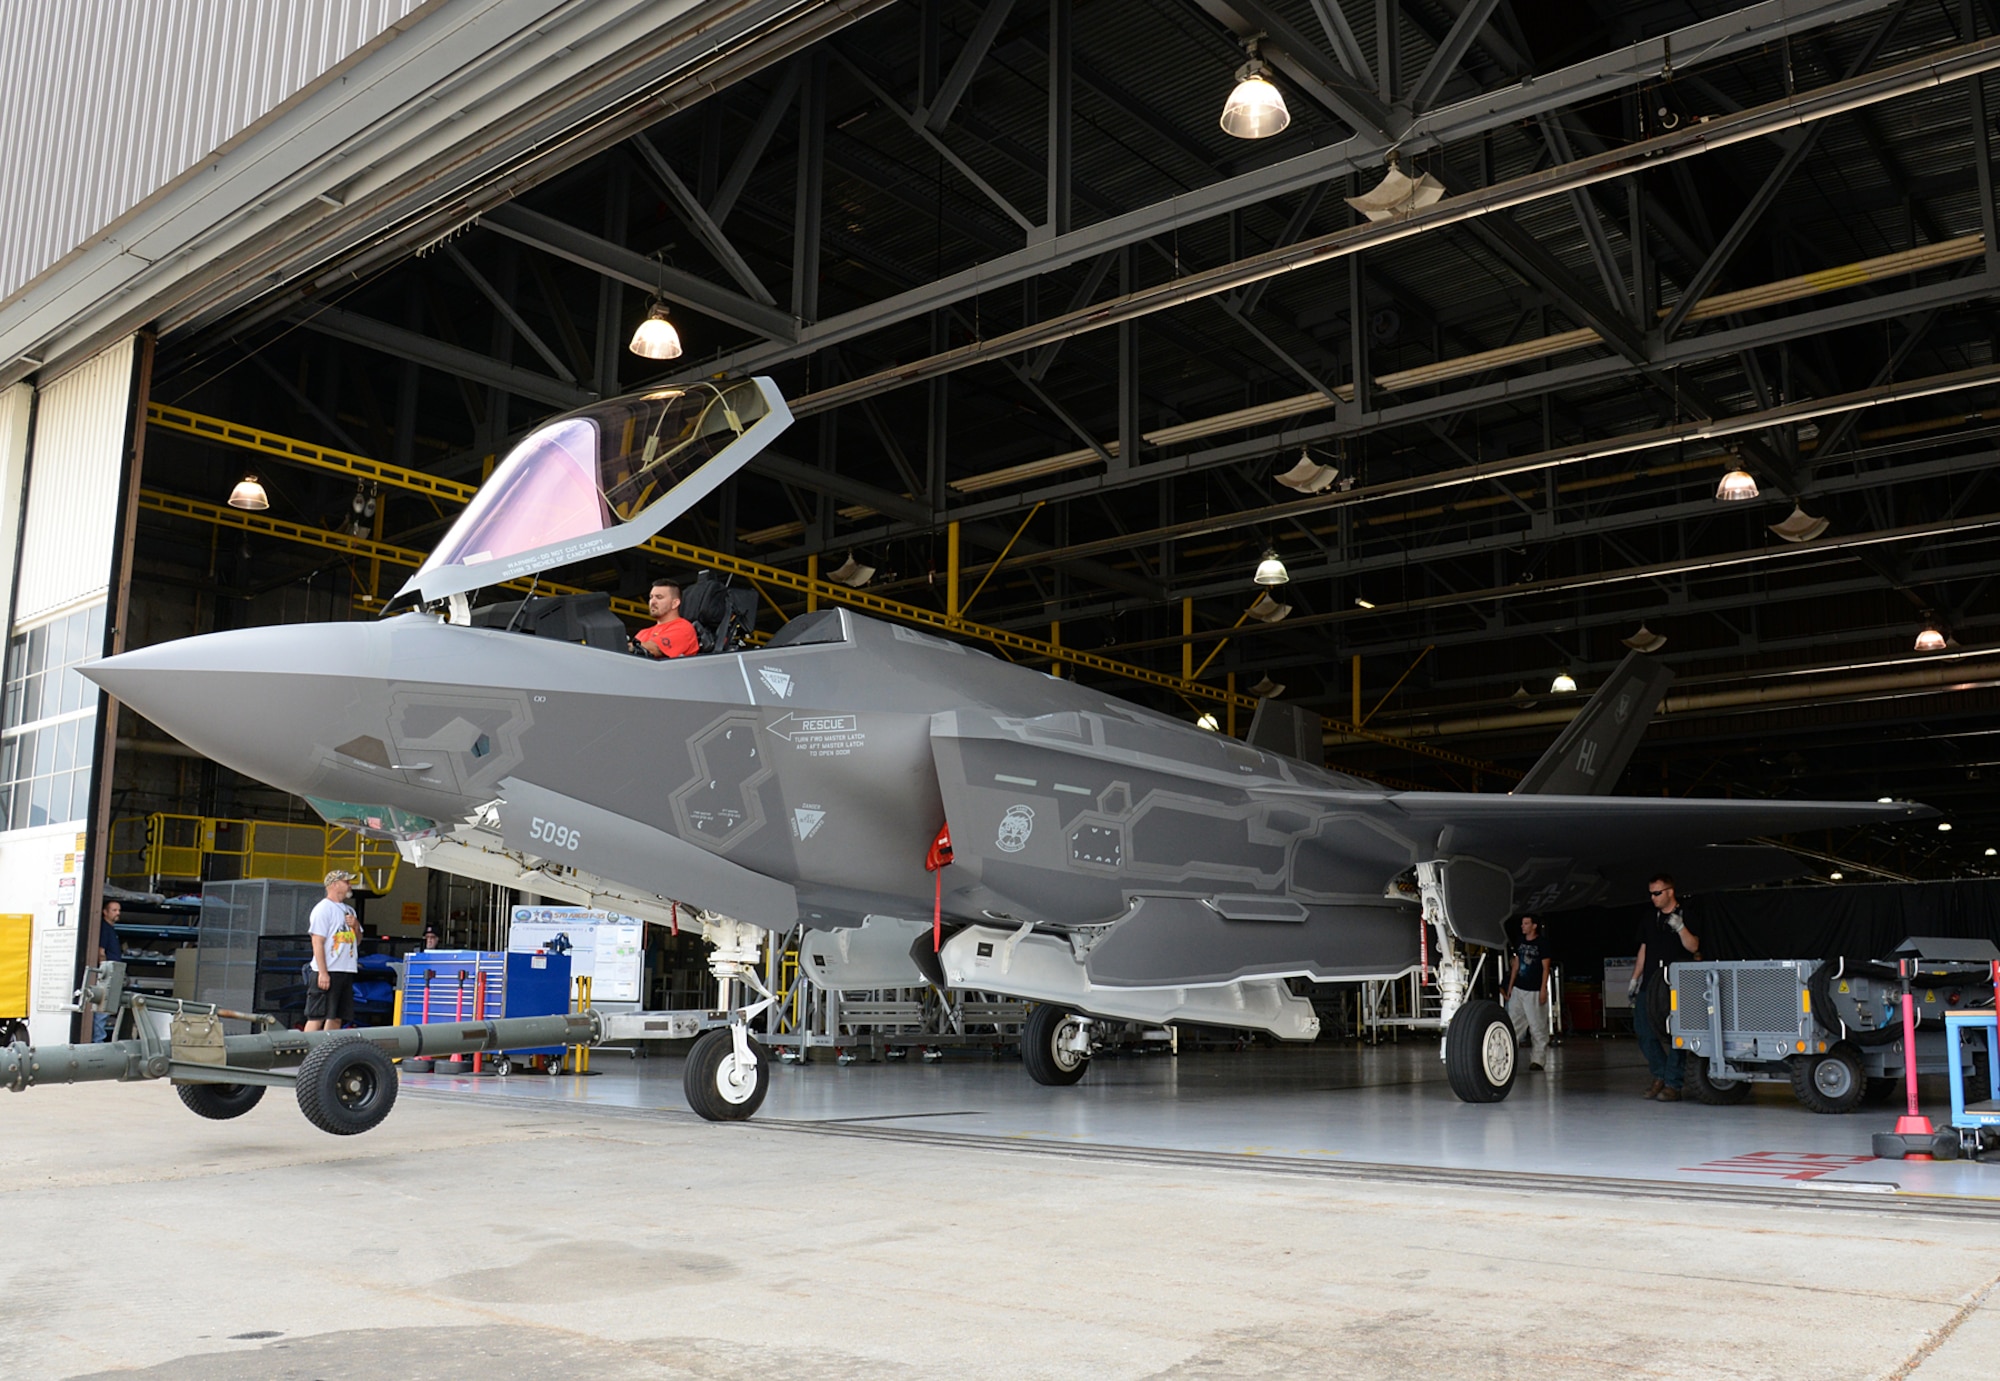 The twelfth F-35A Lightning II aircraft needed to declare initial operational capability (IOC) emerges from a repair hangar after depot and unit-level modifications were completed June 30, 2016 at Hill Air Force Base, Utah. The modifications were needed to correct an overpressure condition in the fuel system during elevated G-maneuvers and fuel migration between internal fuel tanks. (U.S. Air Force Photo by Alex R. Lloyd)